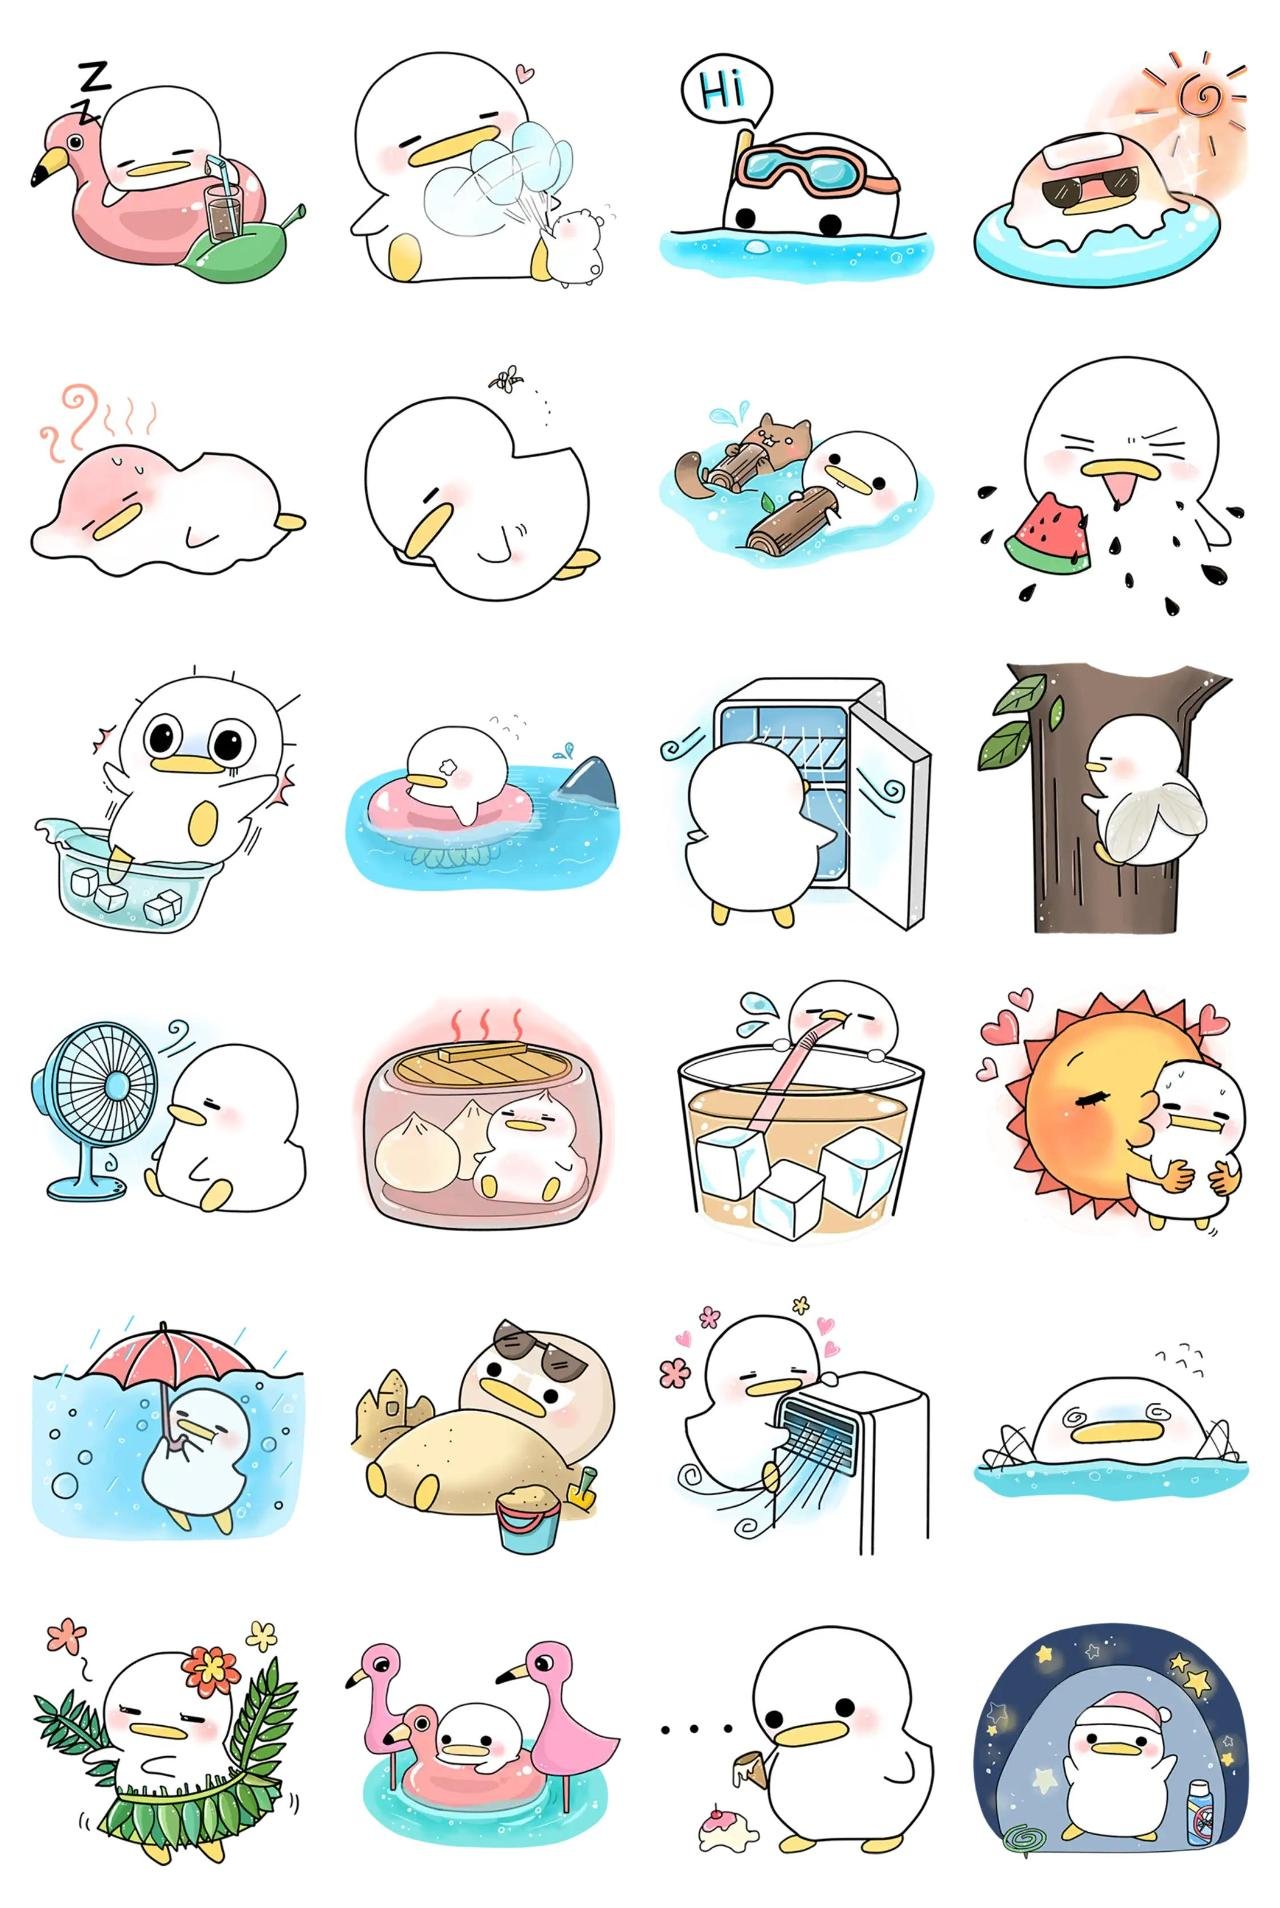 Summer of the Kuwak Animals sticker pack for Whatsapp, Telegram, Signal, and others chatting and message apps